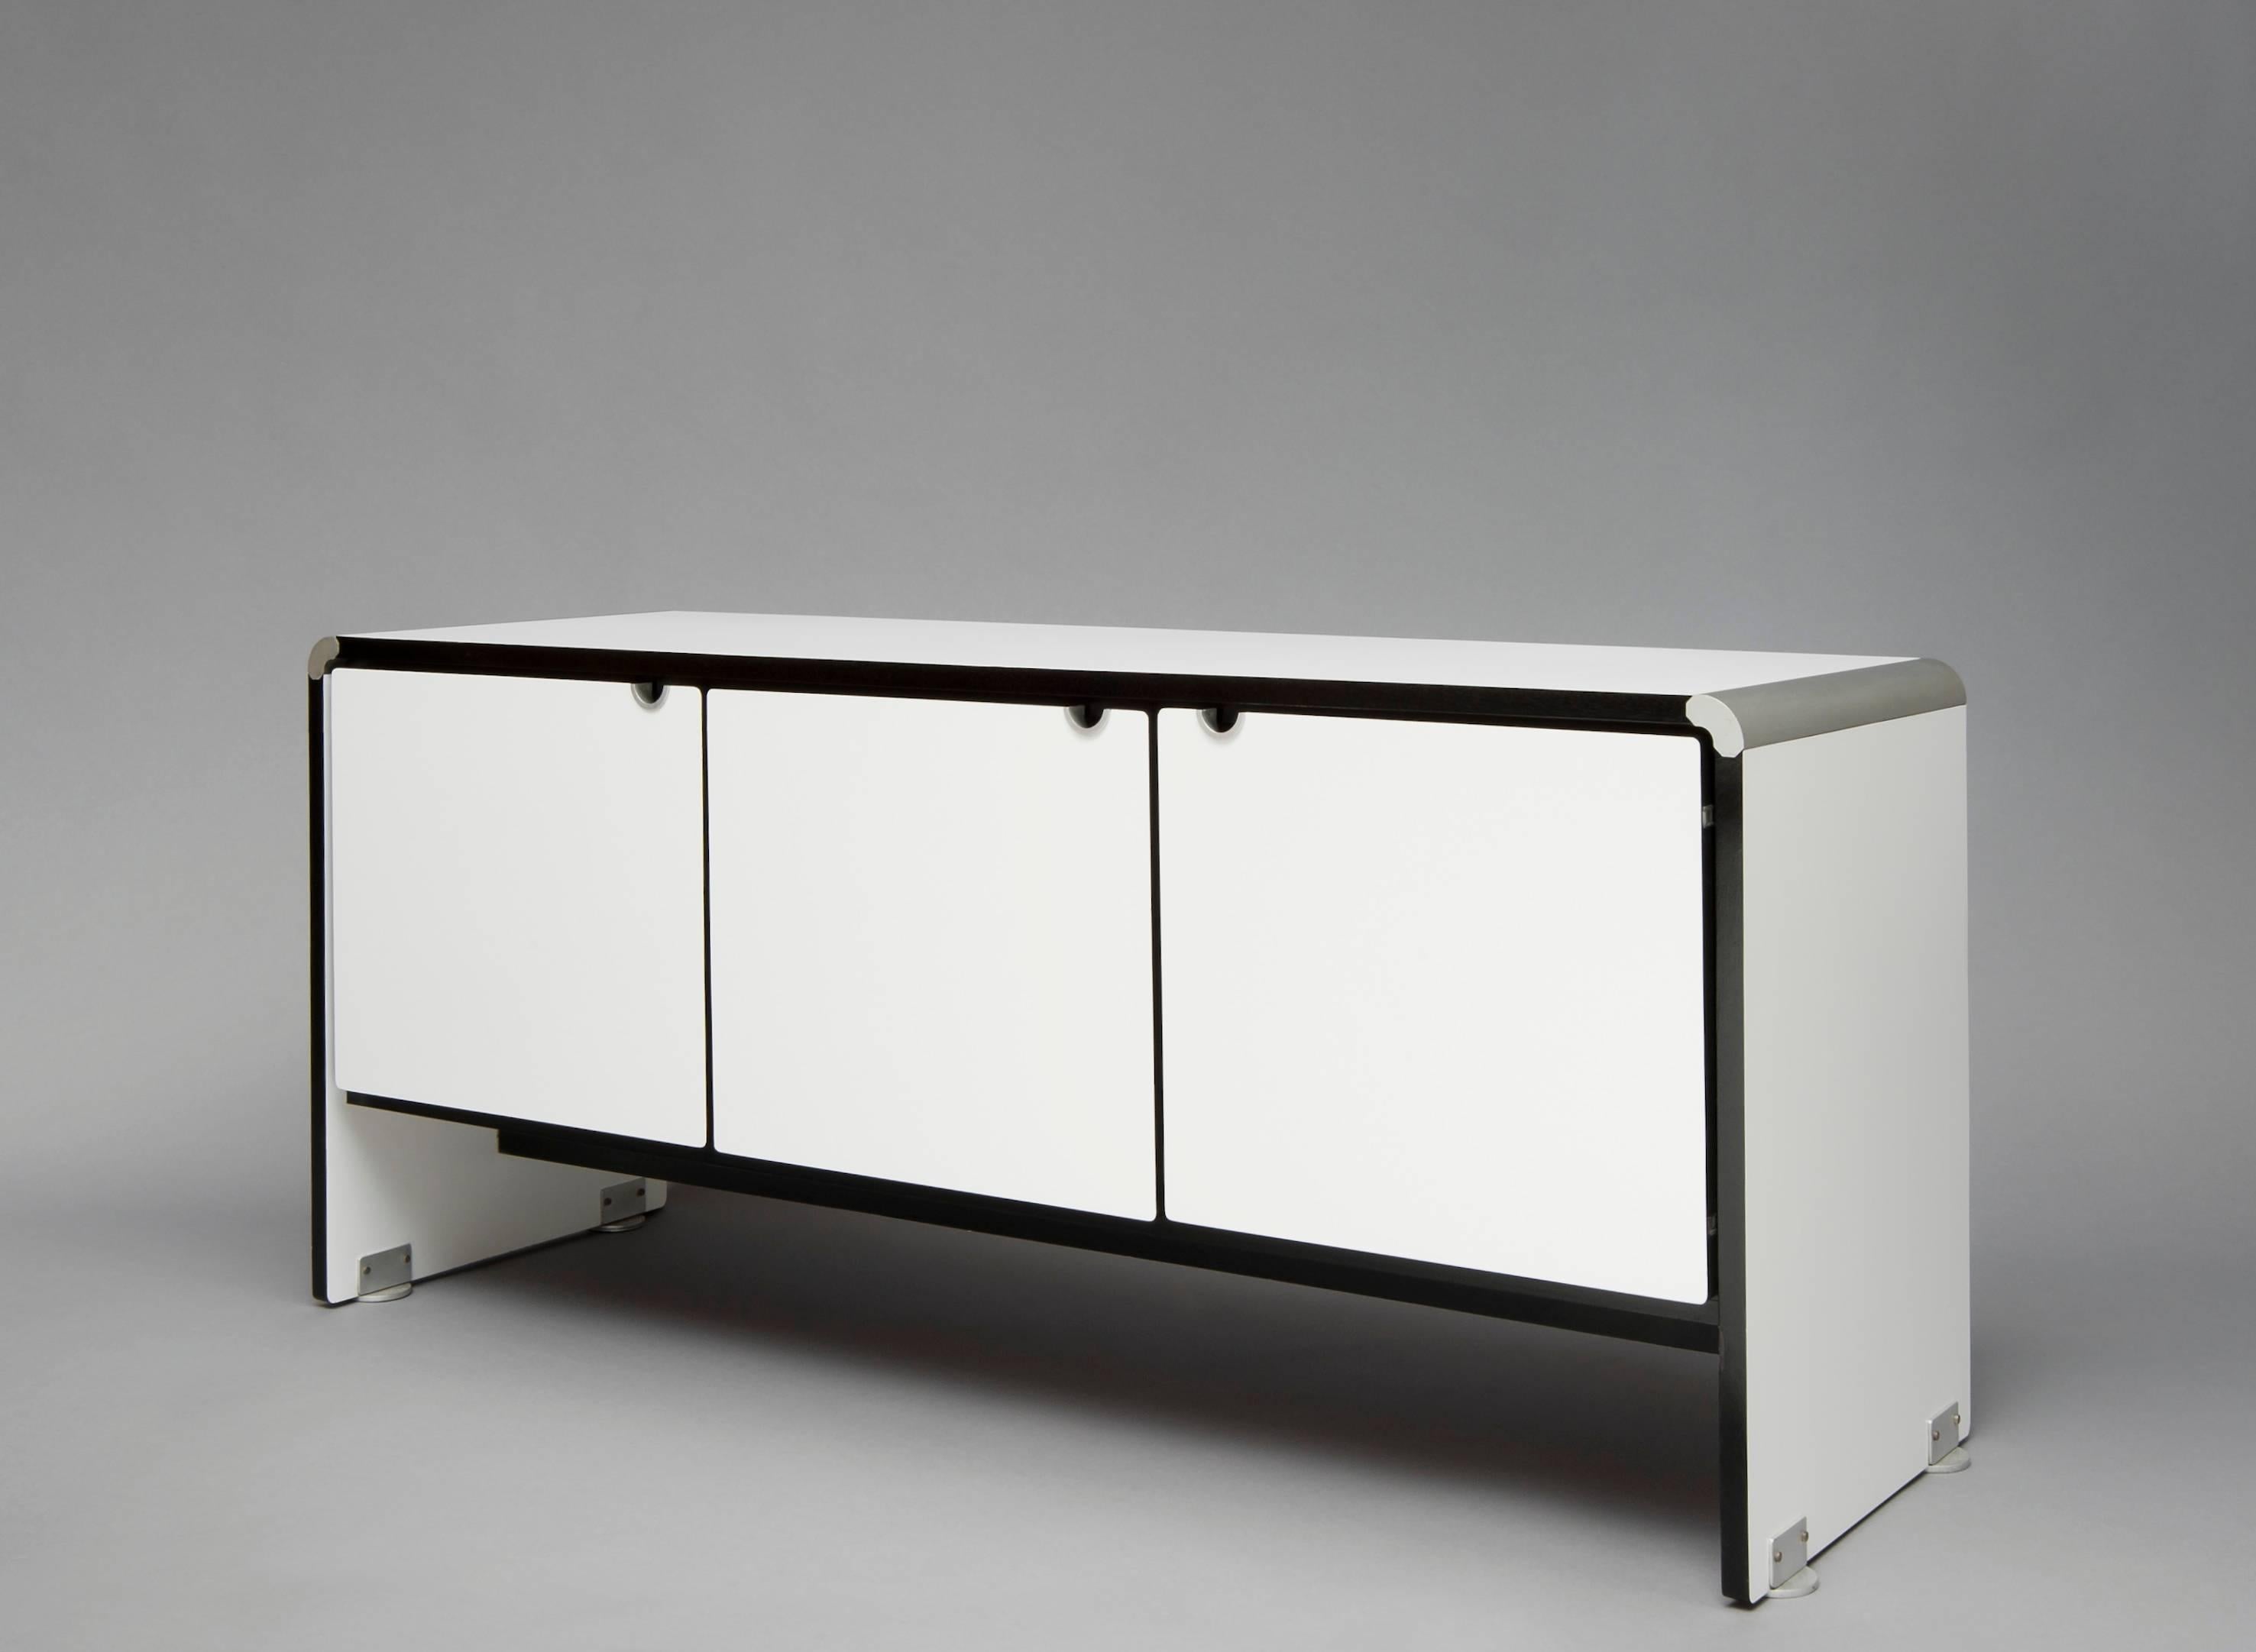 Sideboard AR 715 by Alain Richard (1926-)
Produced by T.F.M./ Mobilier National – Paris – 1974